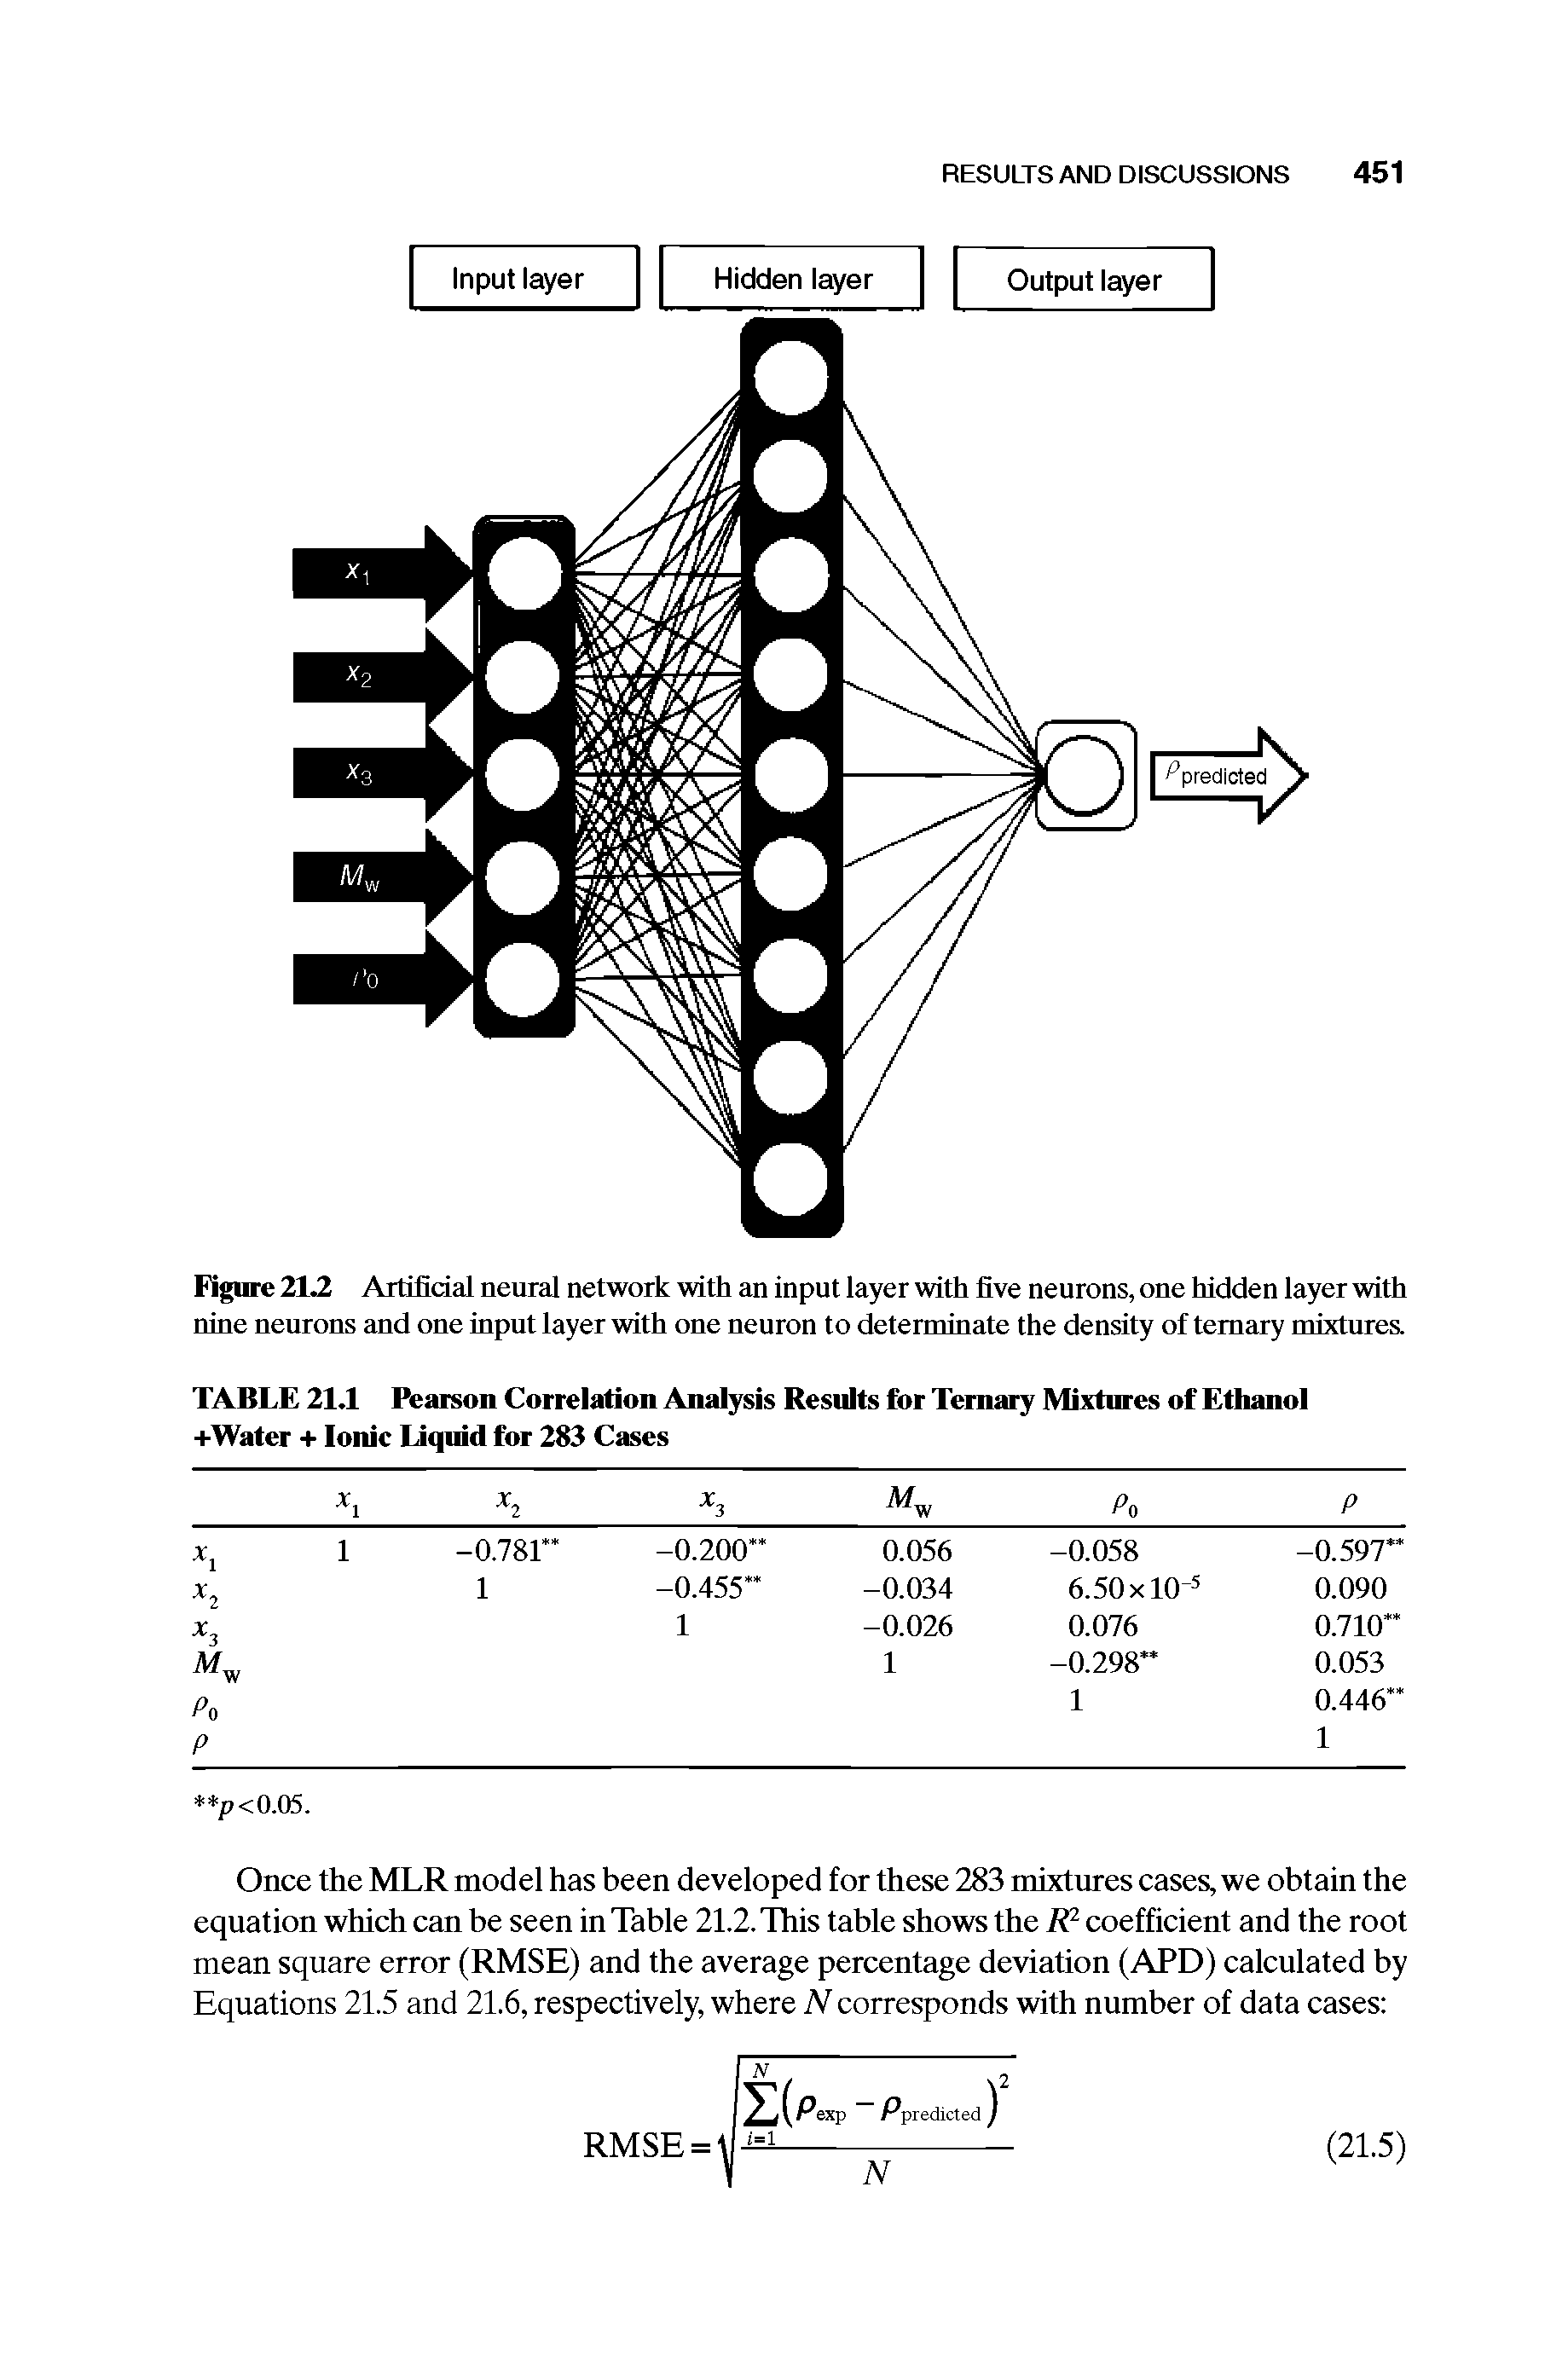 Figure 2L2 Artifidal neural network with an input layer with five neurons, one hidden layer with nine neurons and one input layer with one neuron to determinate the density of ternary mixtures.